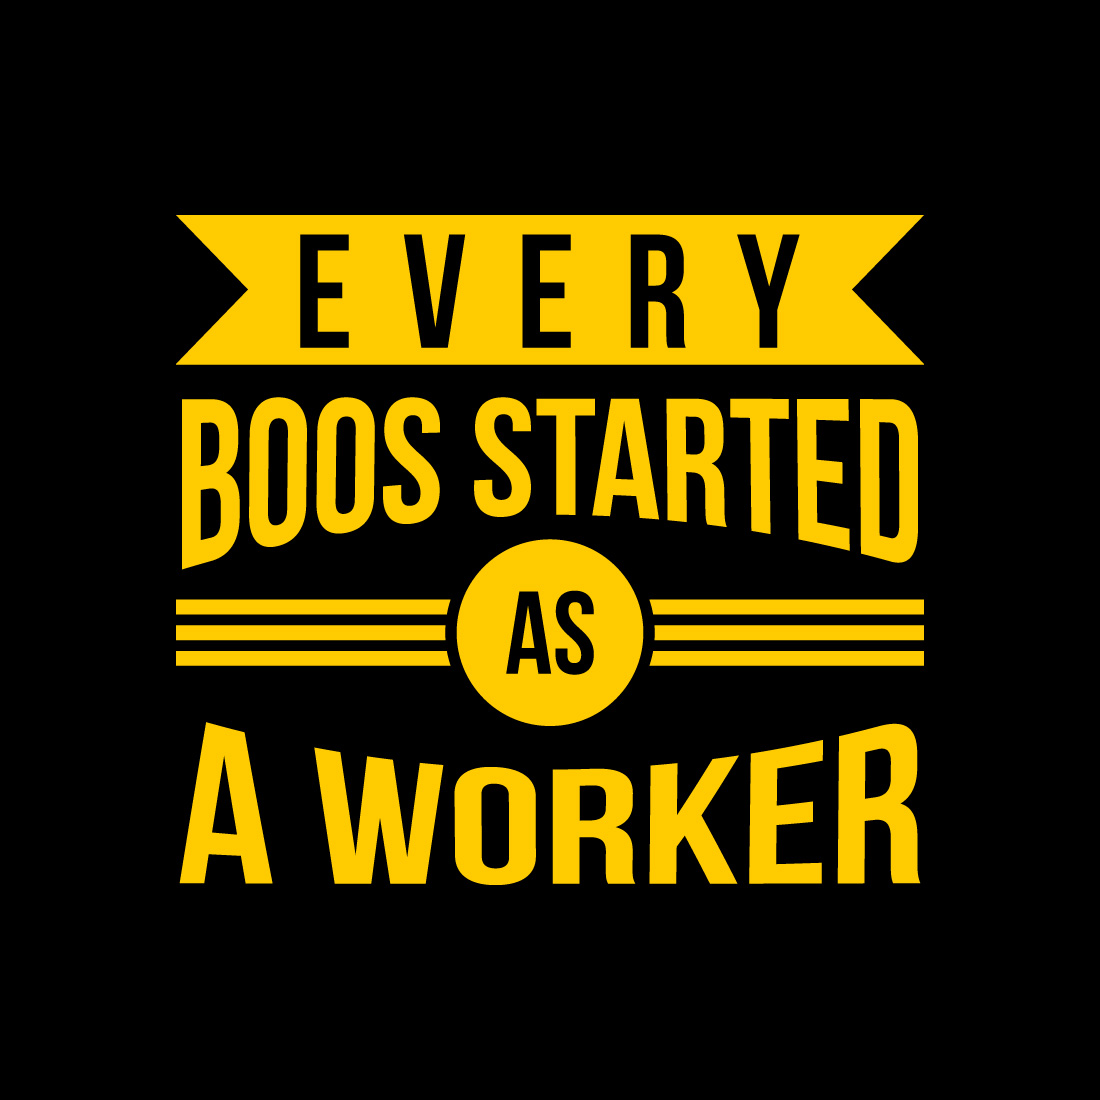 Every boss started as a worker tshirt design preview image.